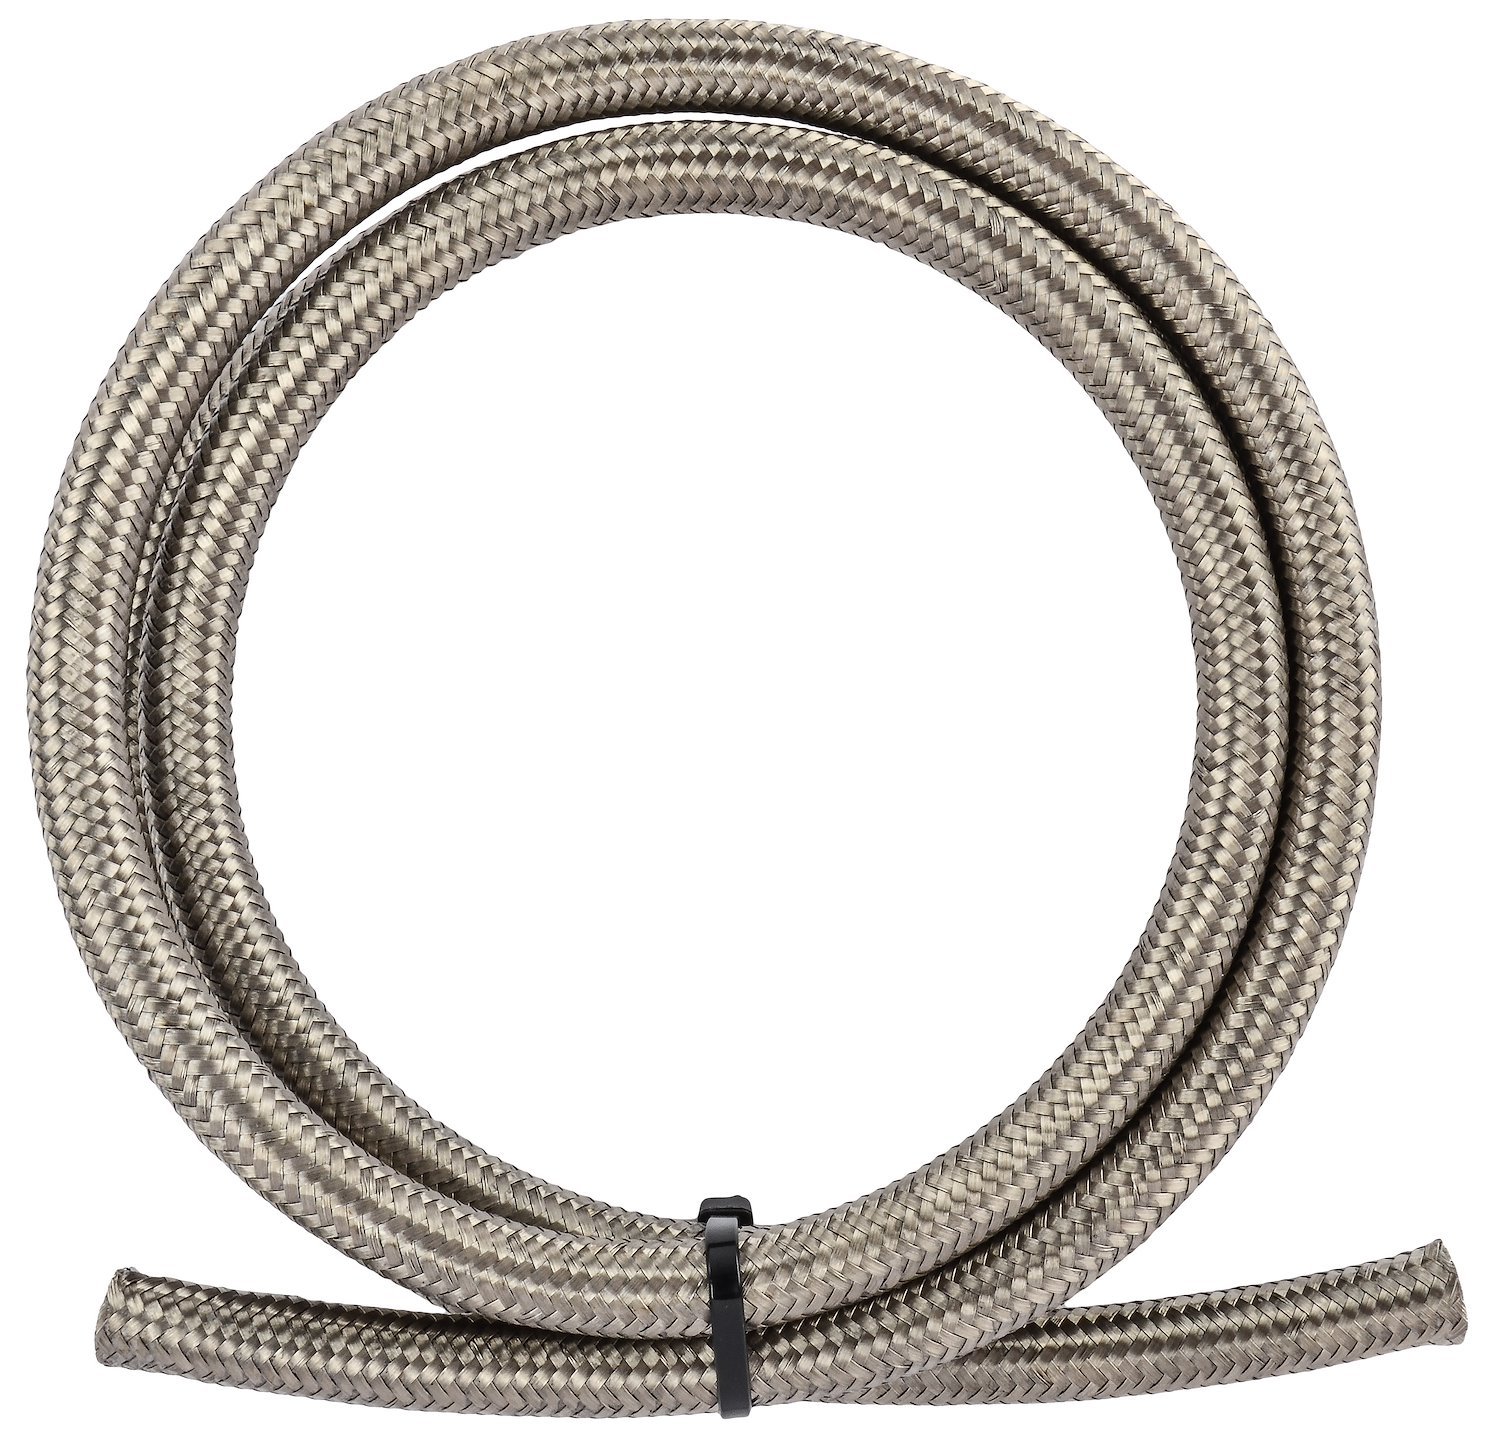 Pro-Flo 200 Series Stainless Steel Braided Hose -06